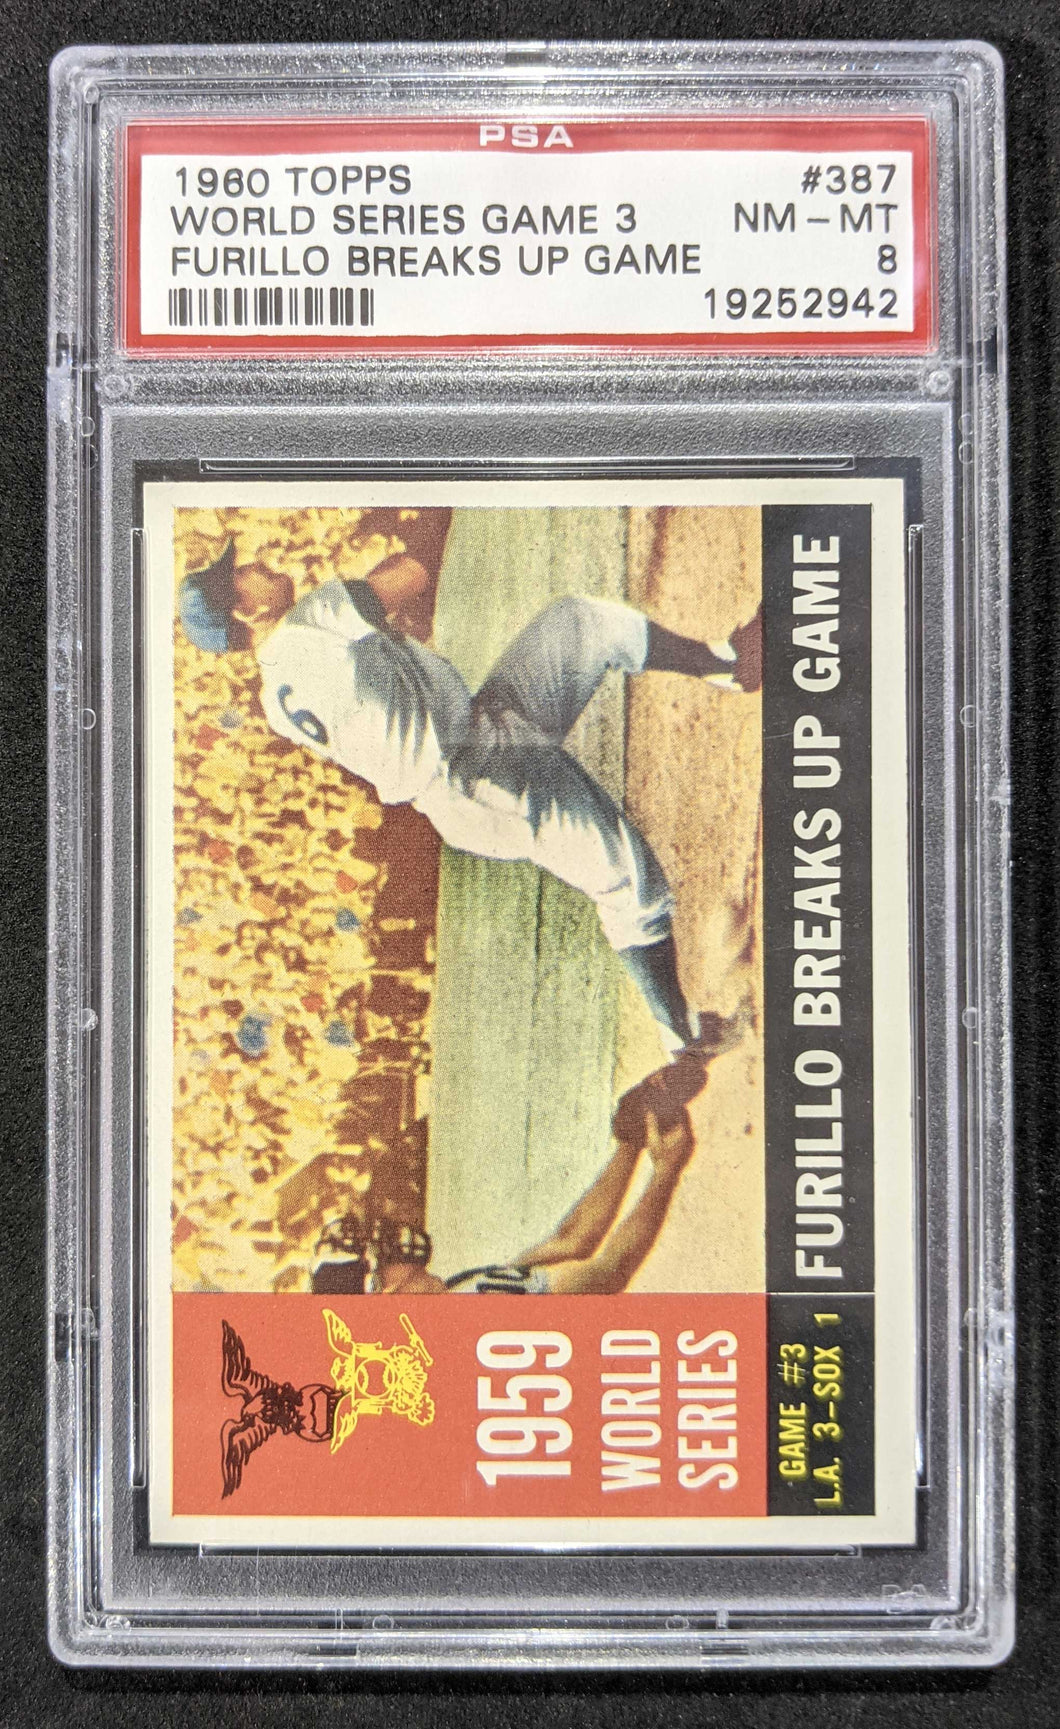 1960 Topps World Series Game 3 Furillo Breaks Up Game #387 PSA NM-MT 8